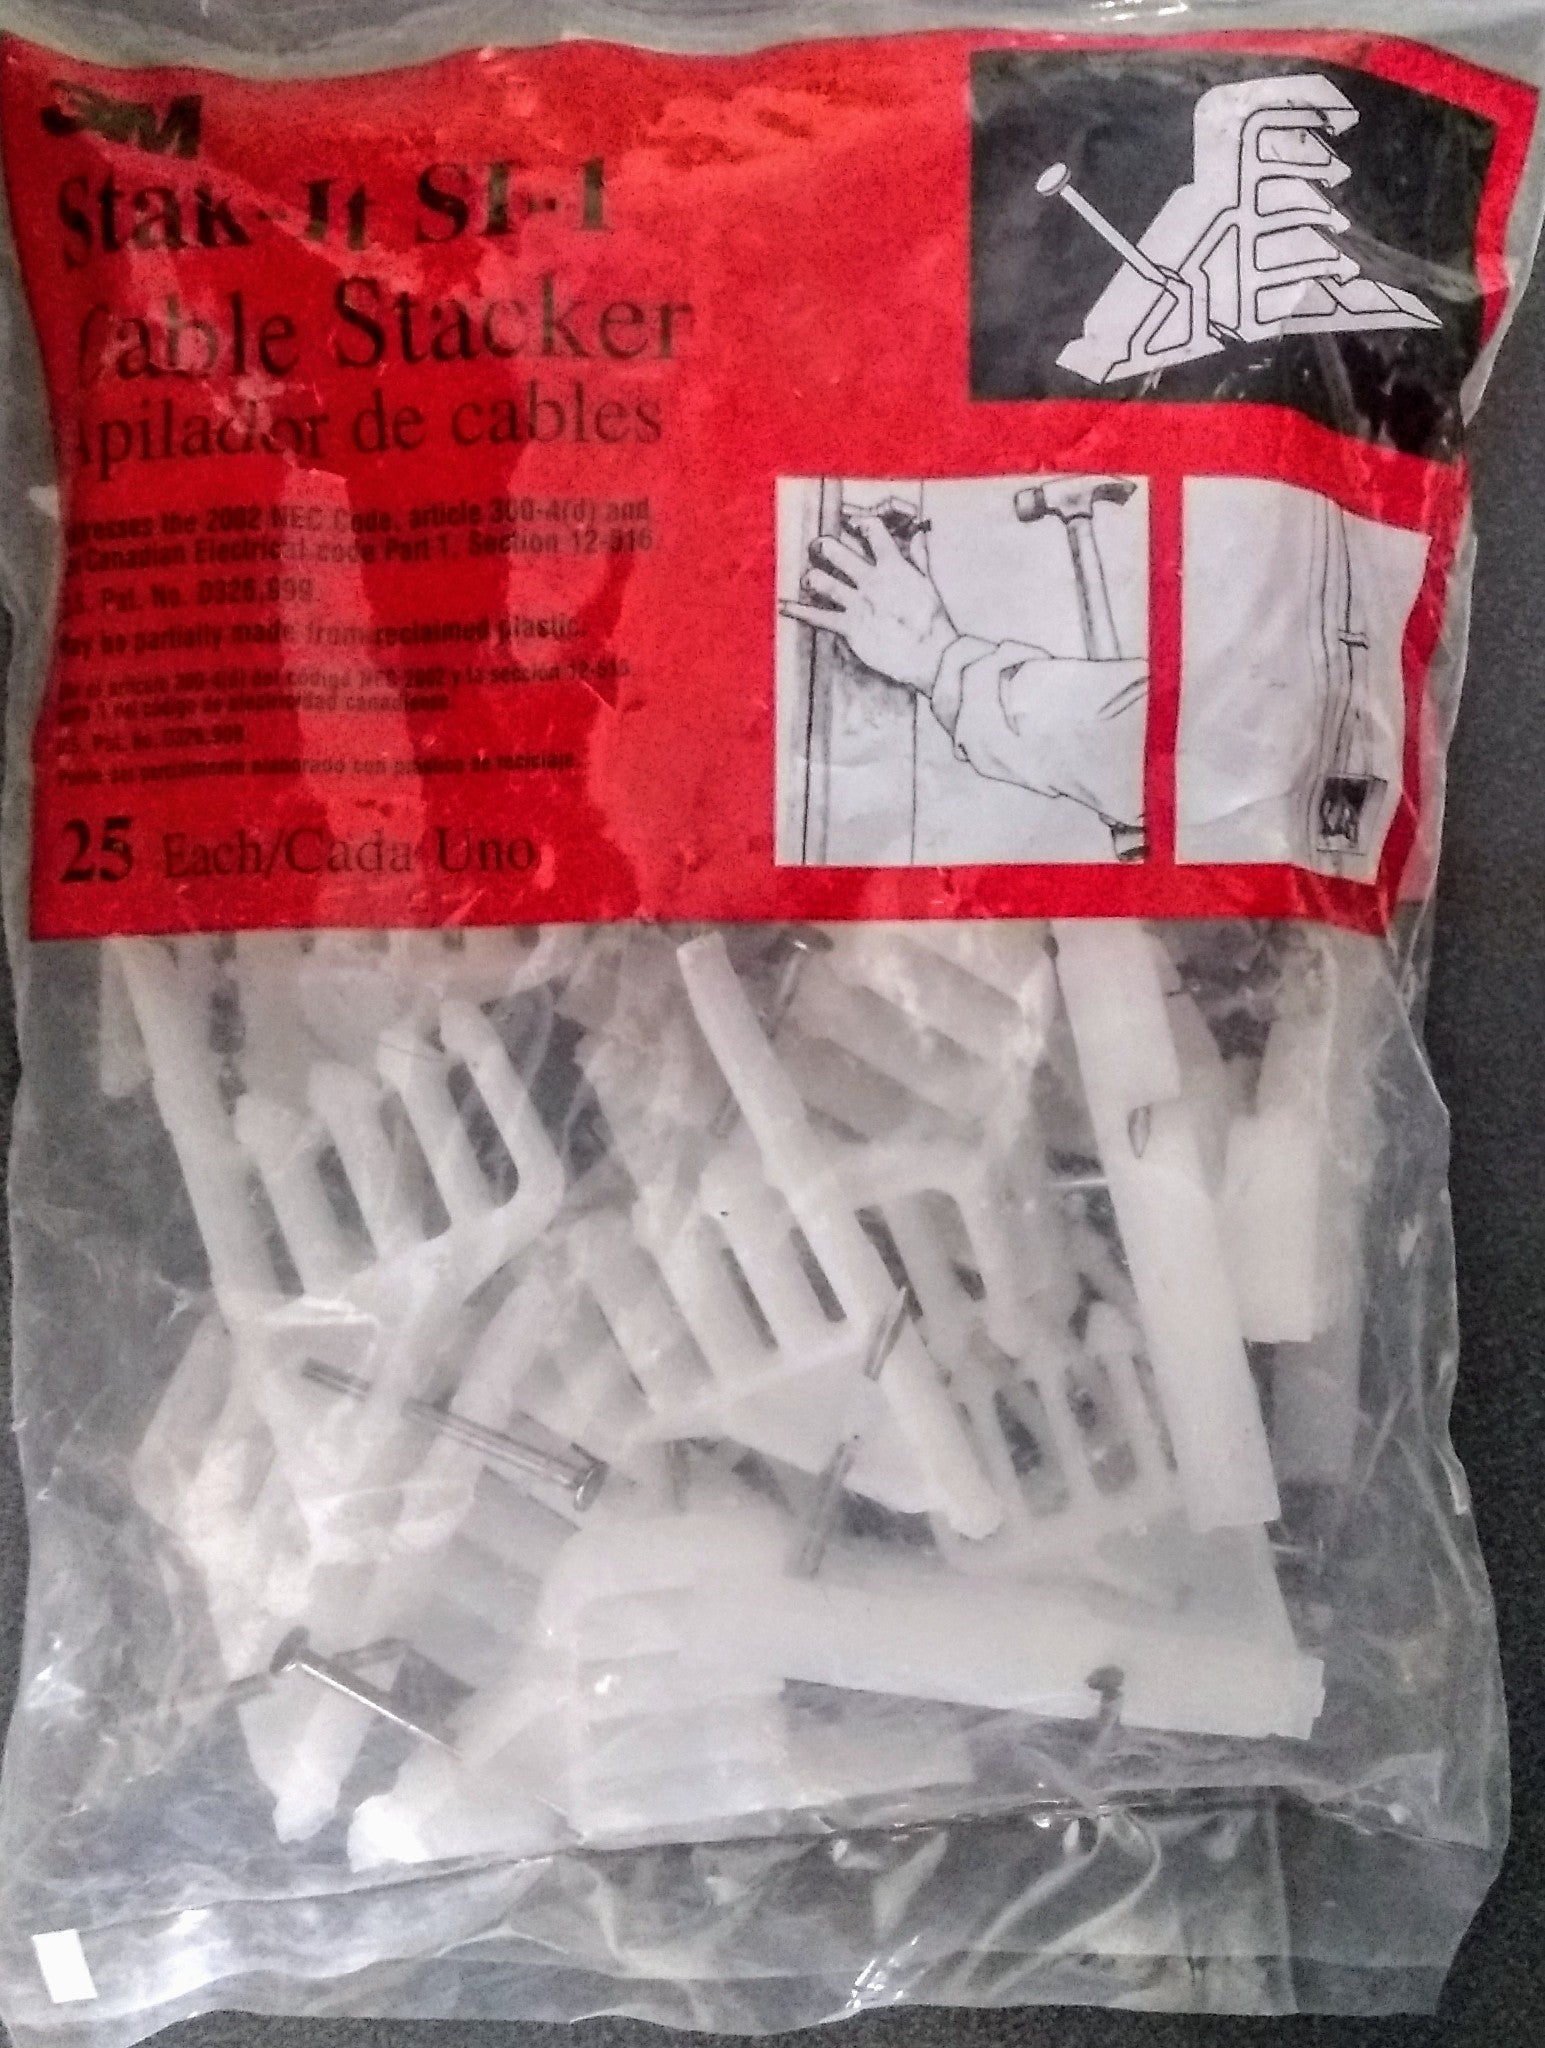 3M Stak-It SI-1 Cable Stacker Bag of 25 pieces USA